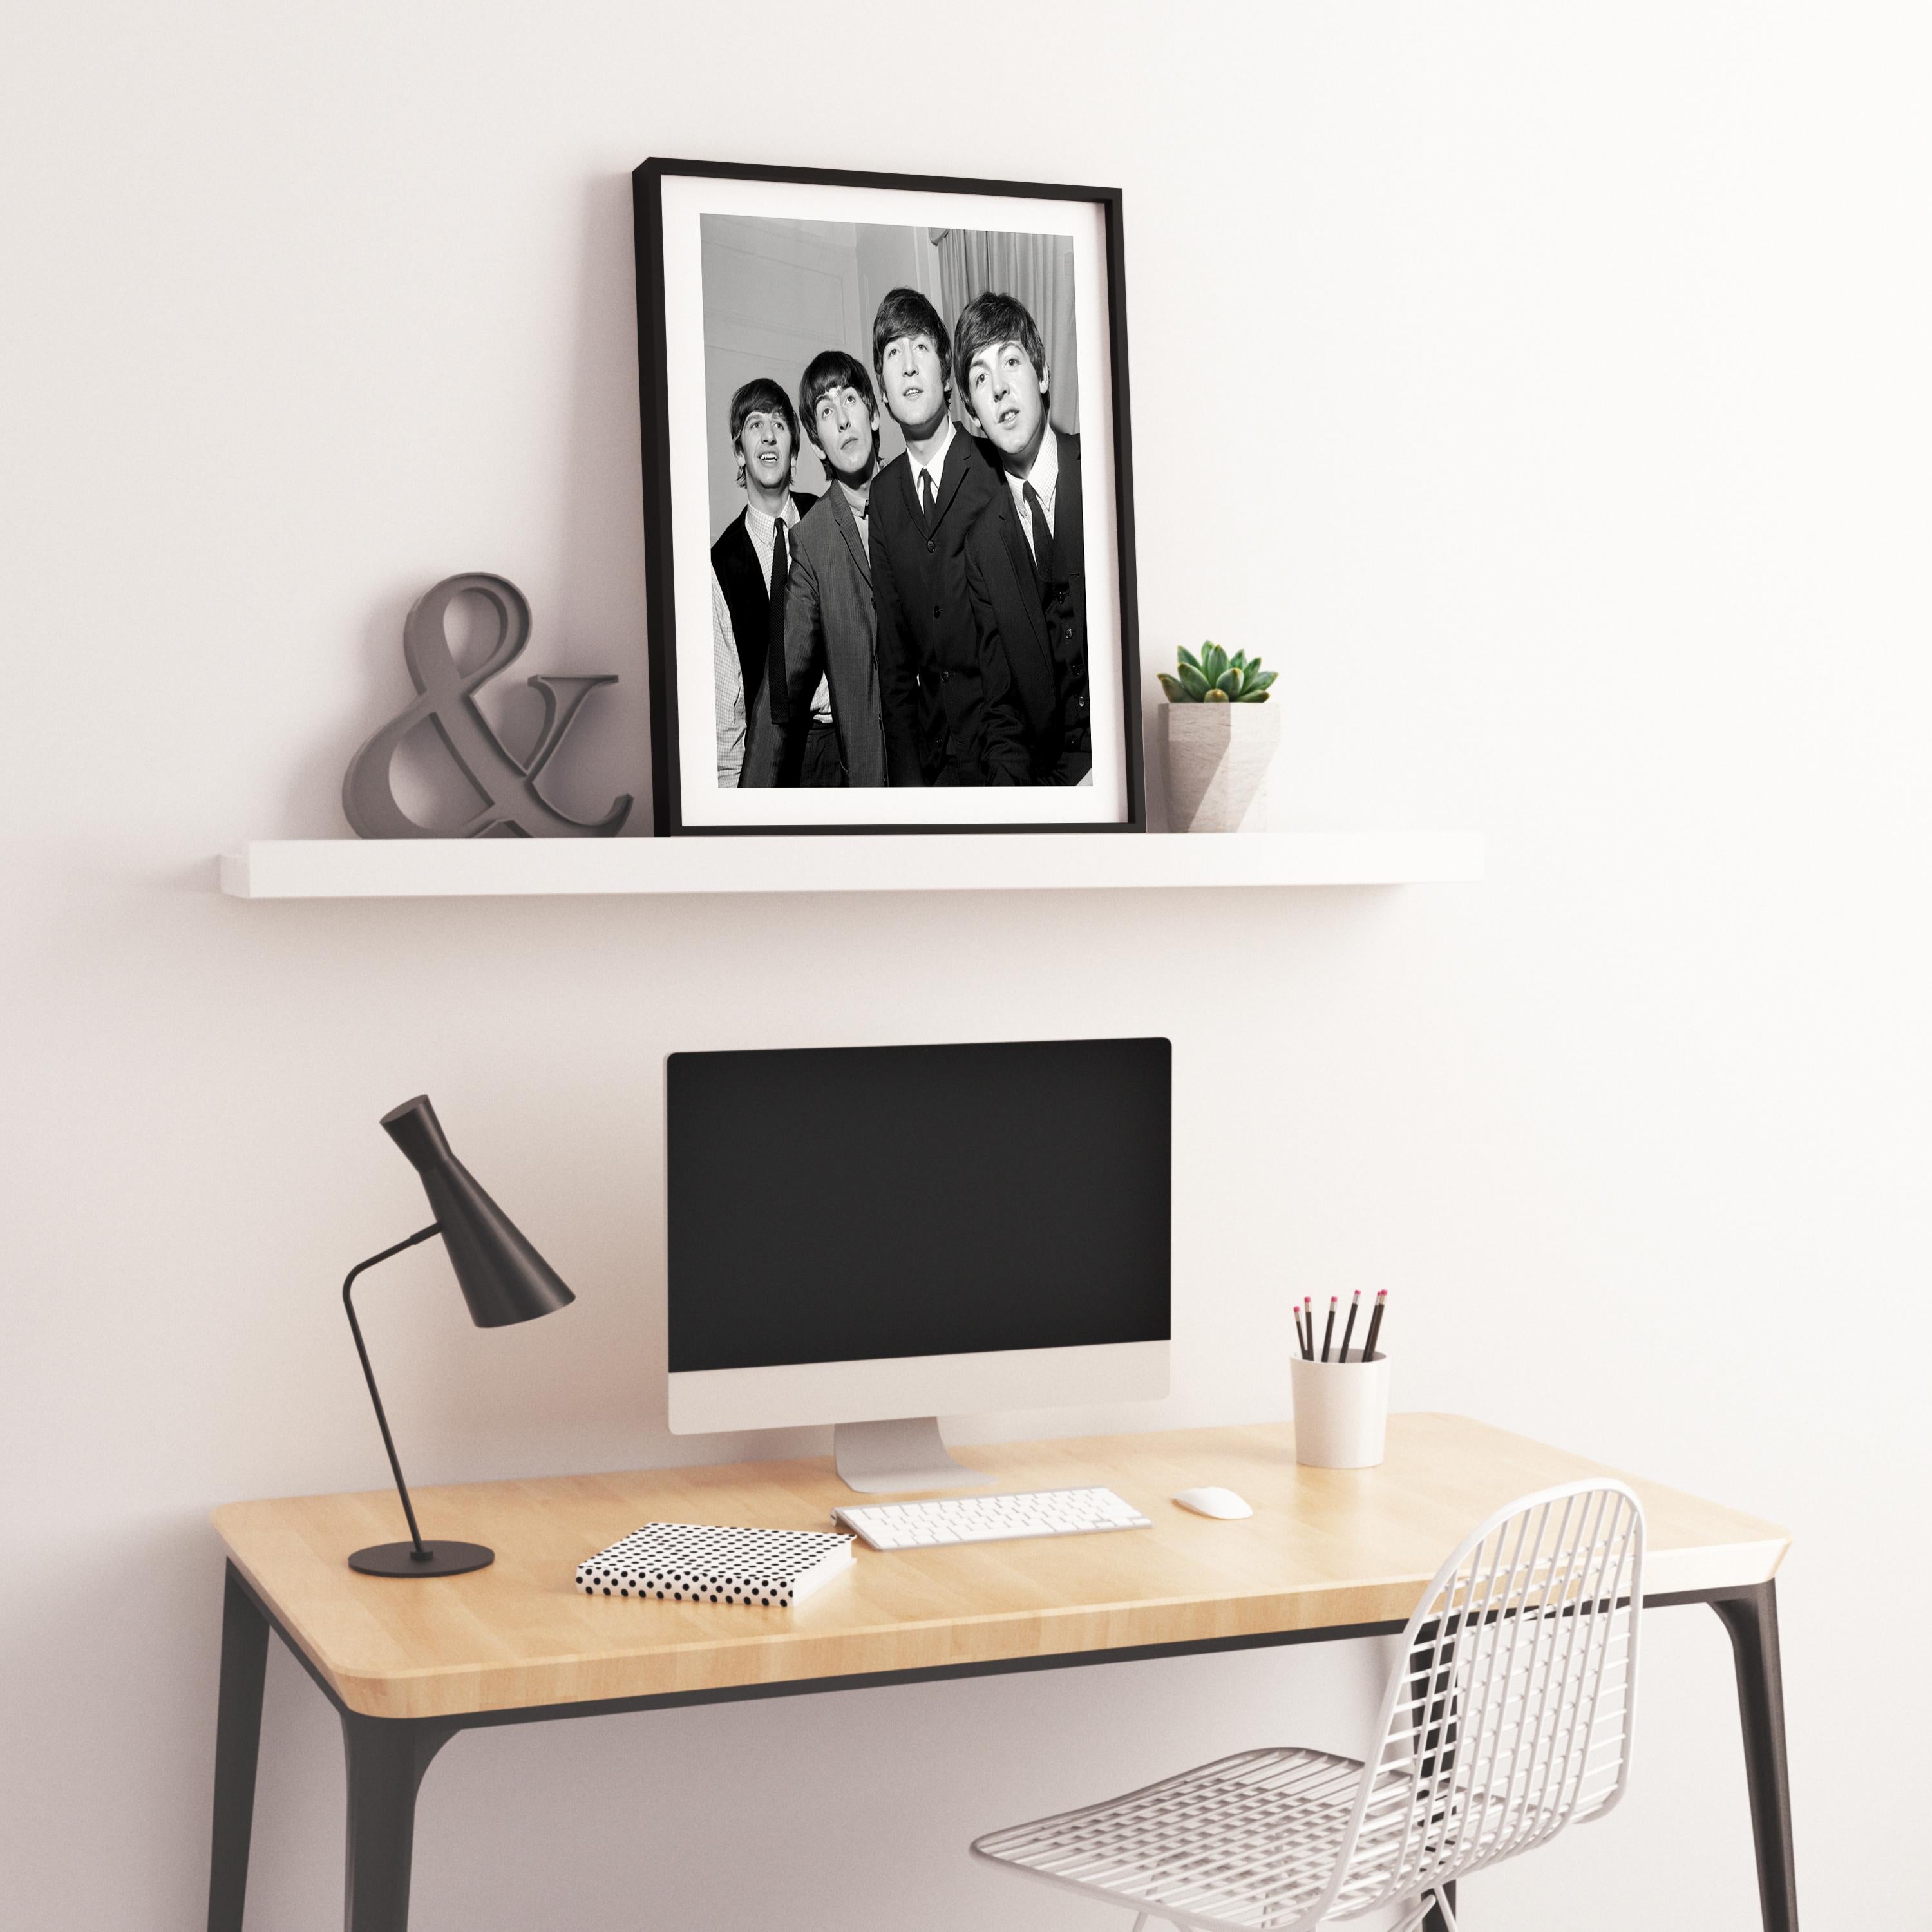 The Beatles: Young and Smiling Globe Photos Fine Art Print - Black Portrait Photograph by Unknown